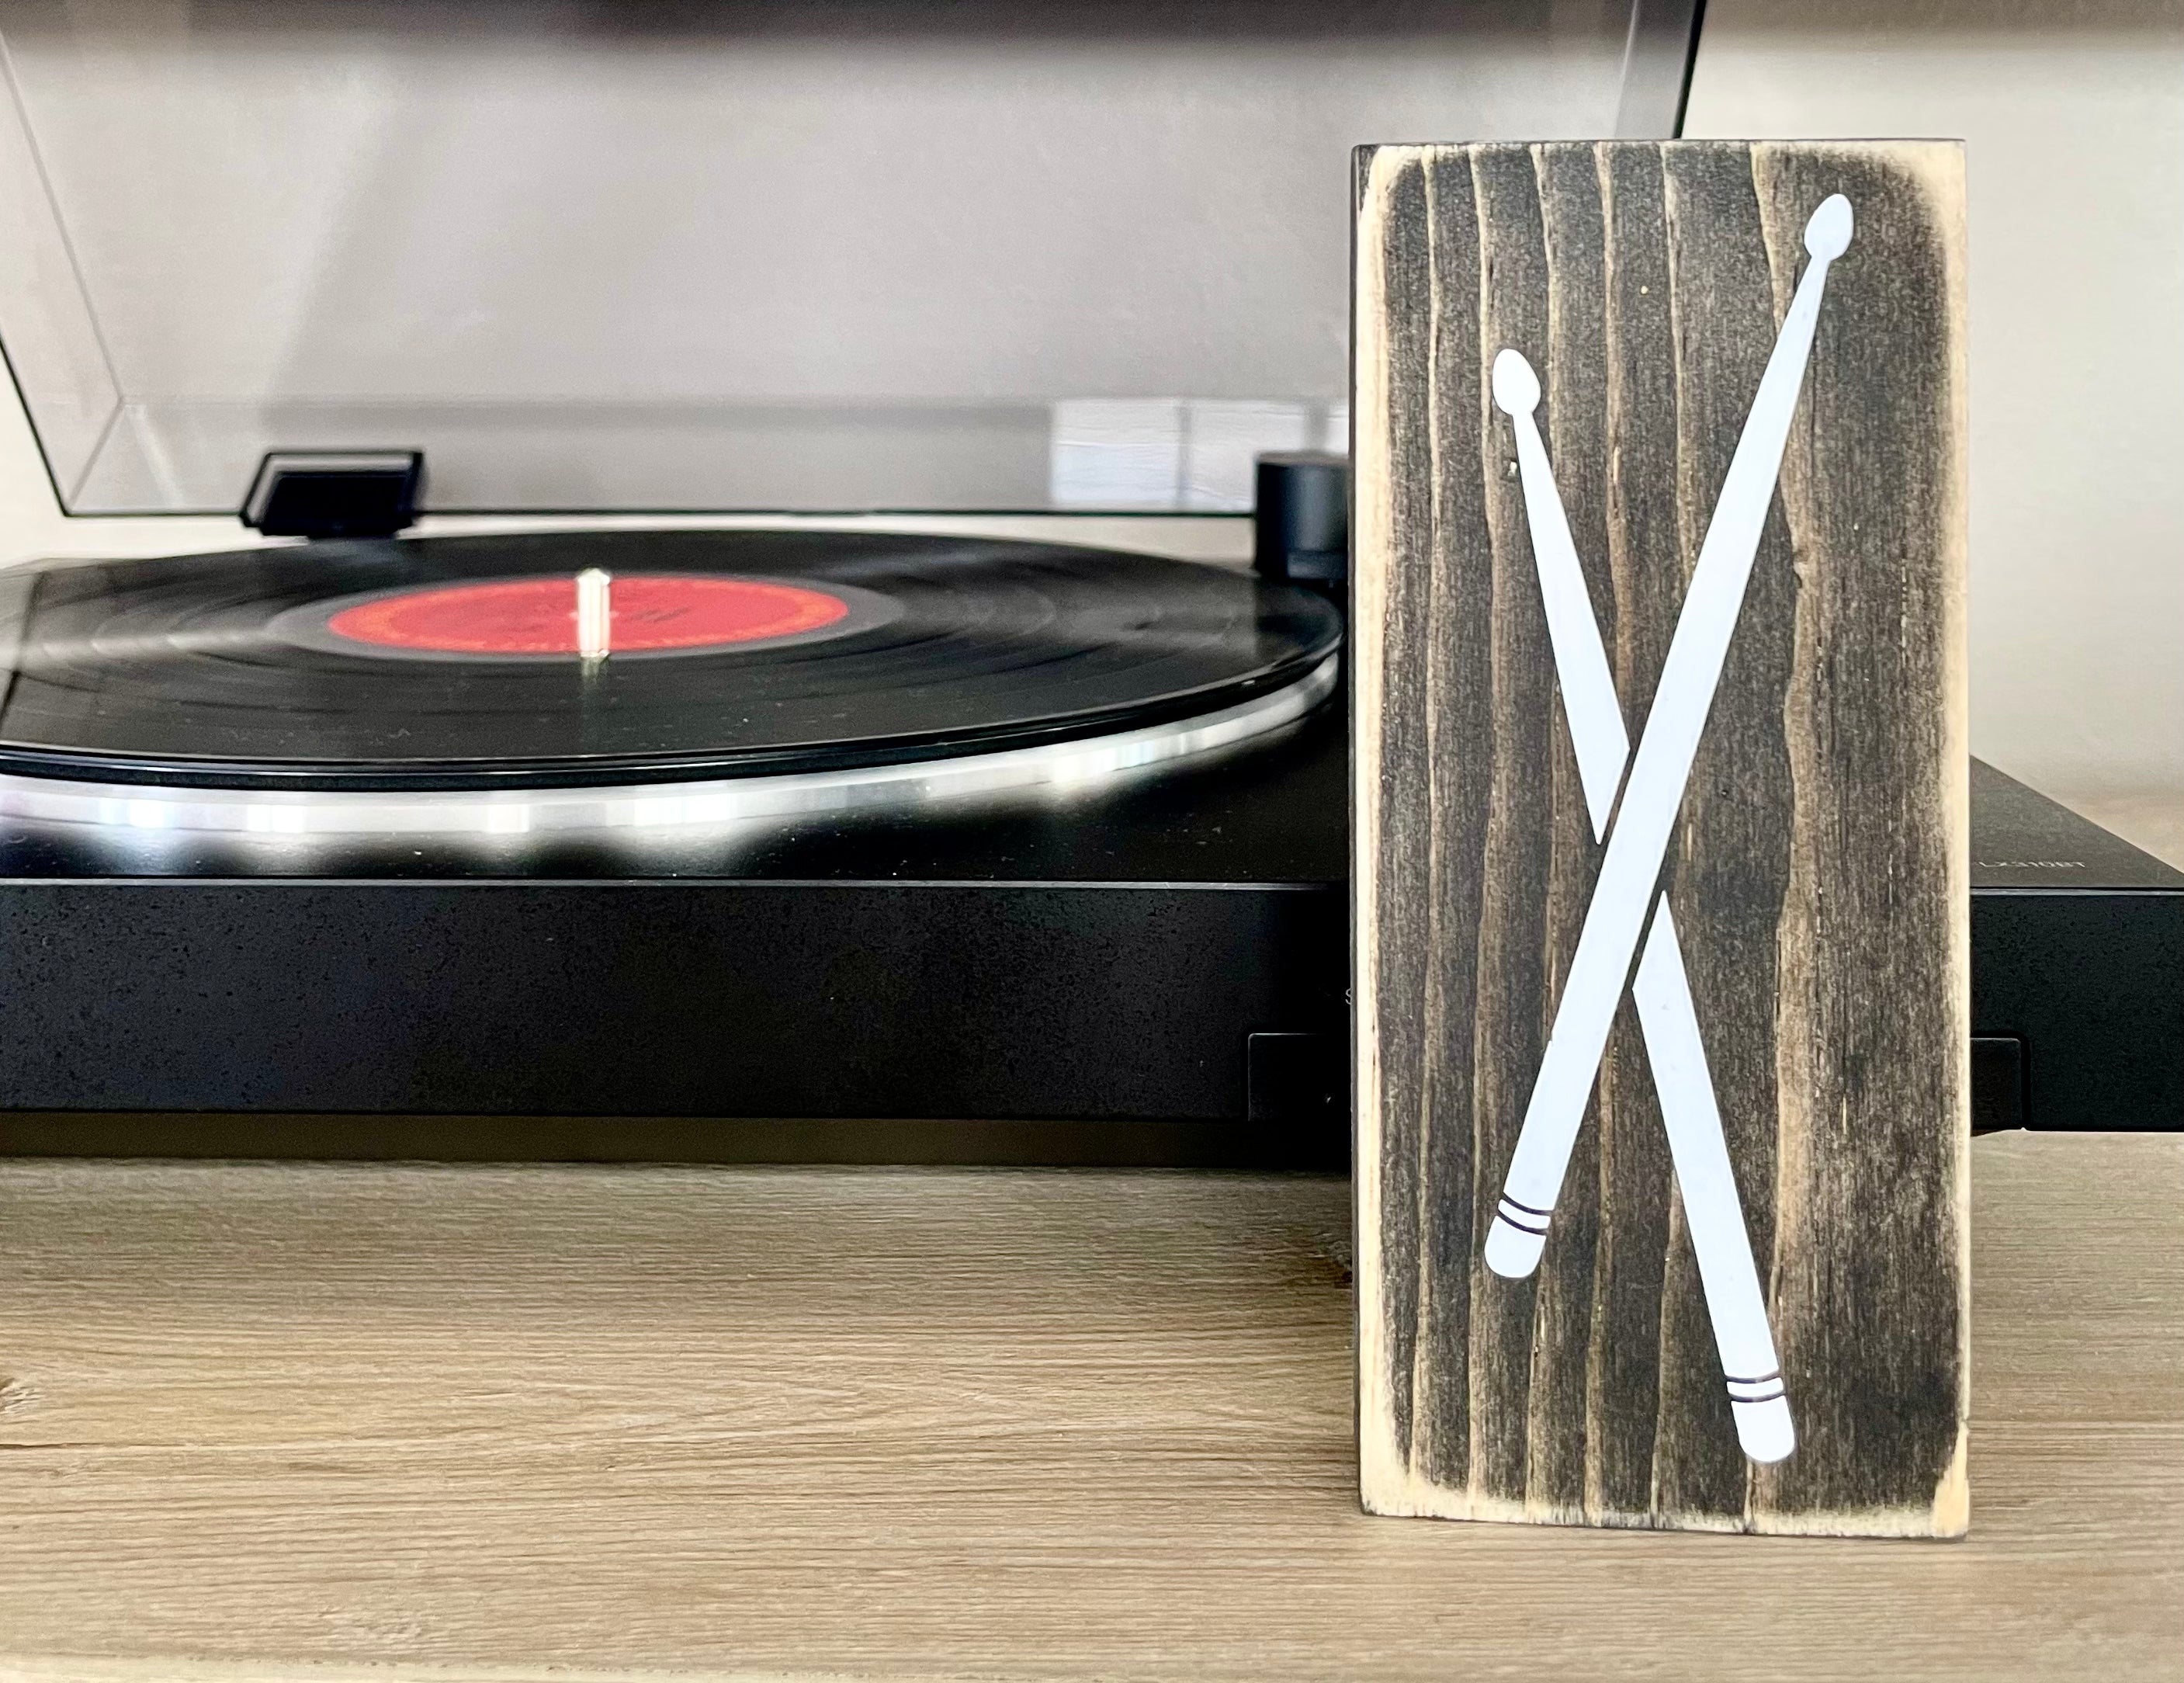 A small, black, wood sign with drumsticks painted on it, sits vertically on a table in front of a record player. 